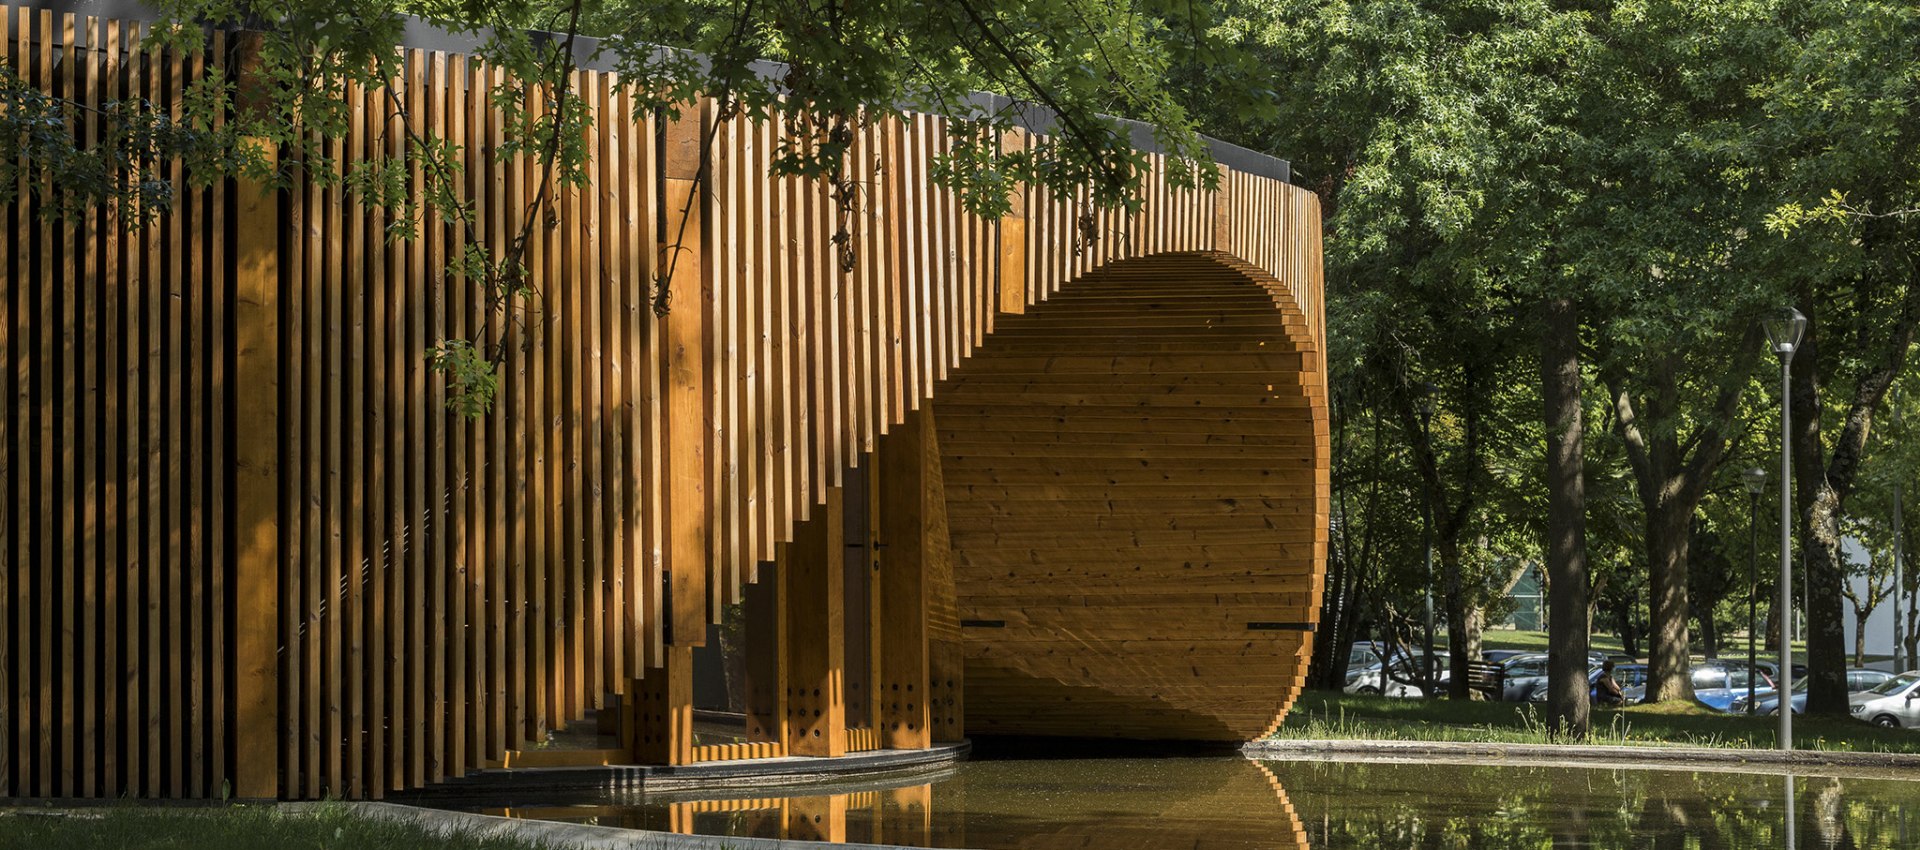 Vertical Wood Slats Cover This New Tourist Info Center In Portugal